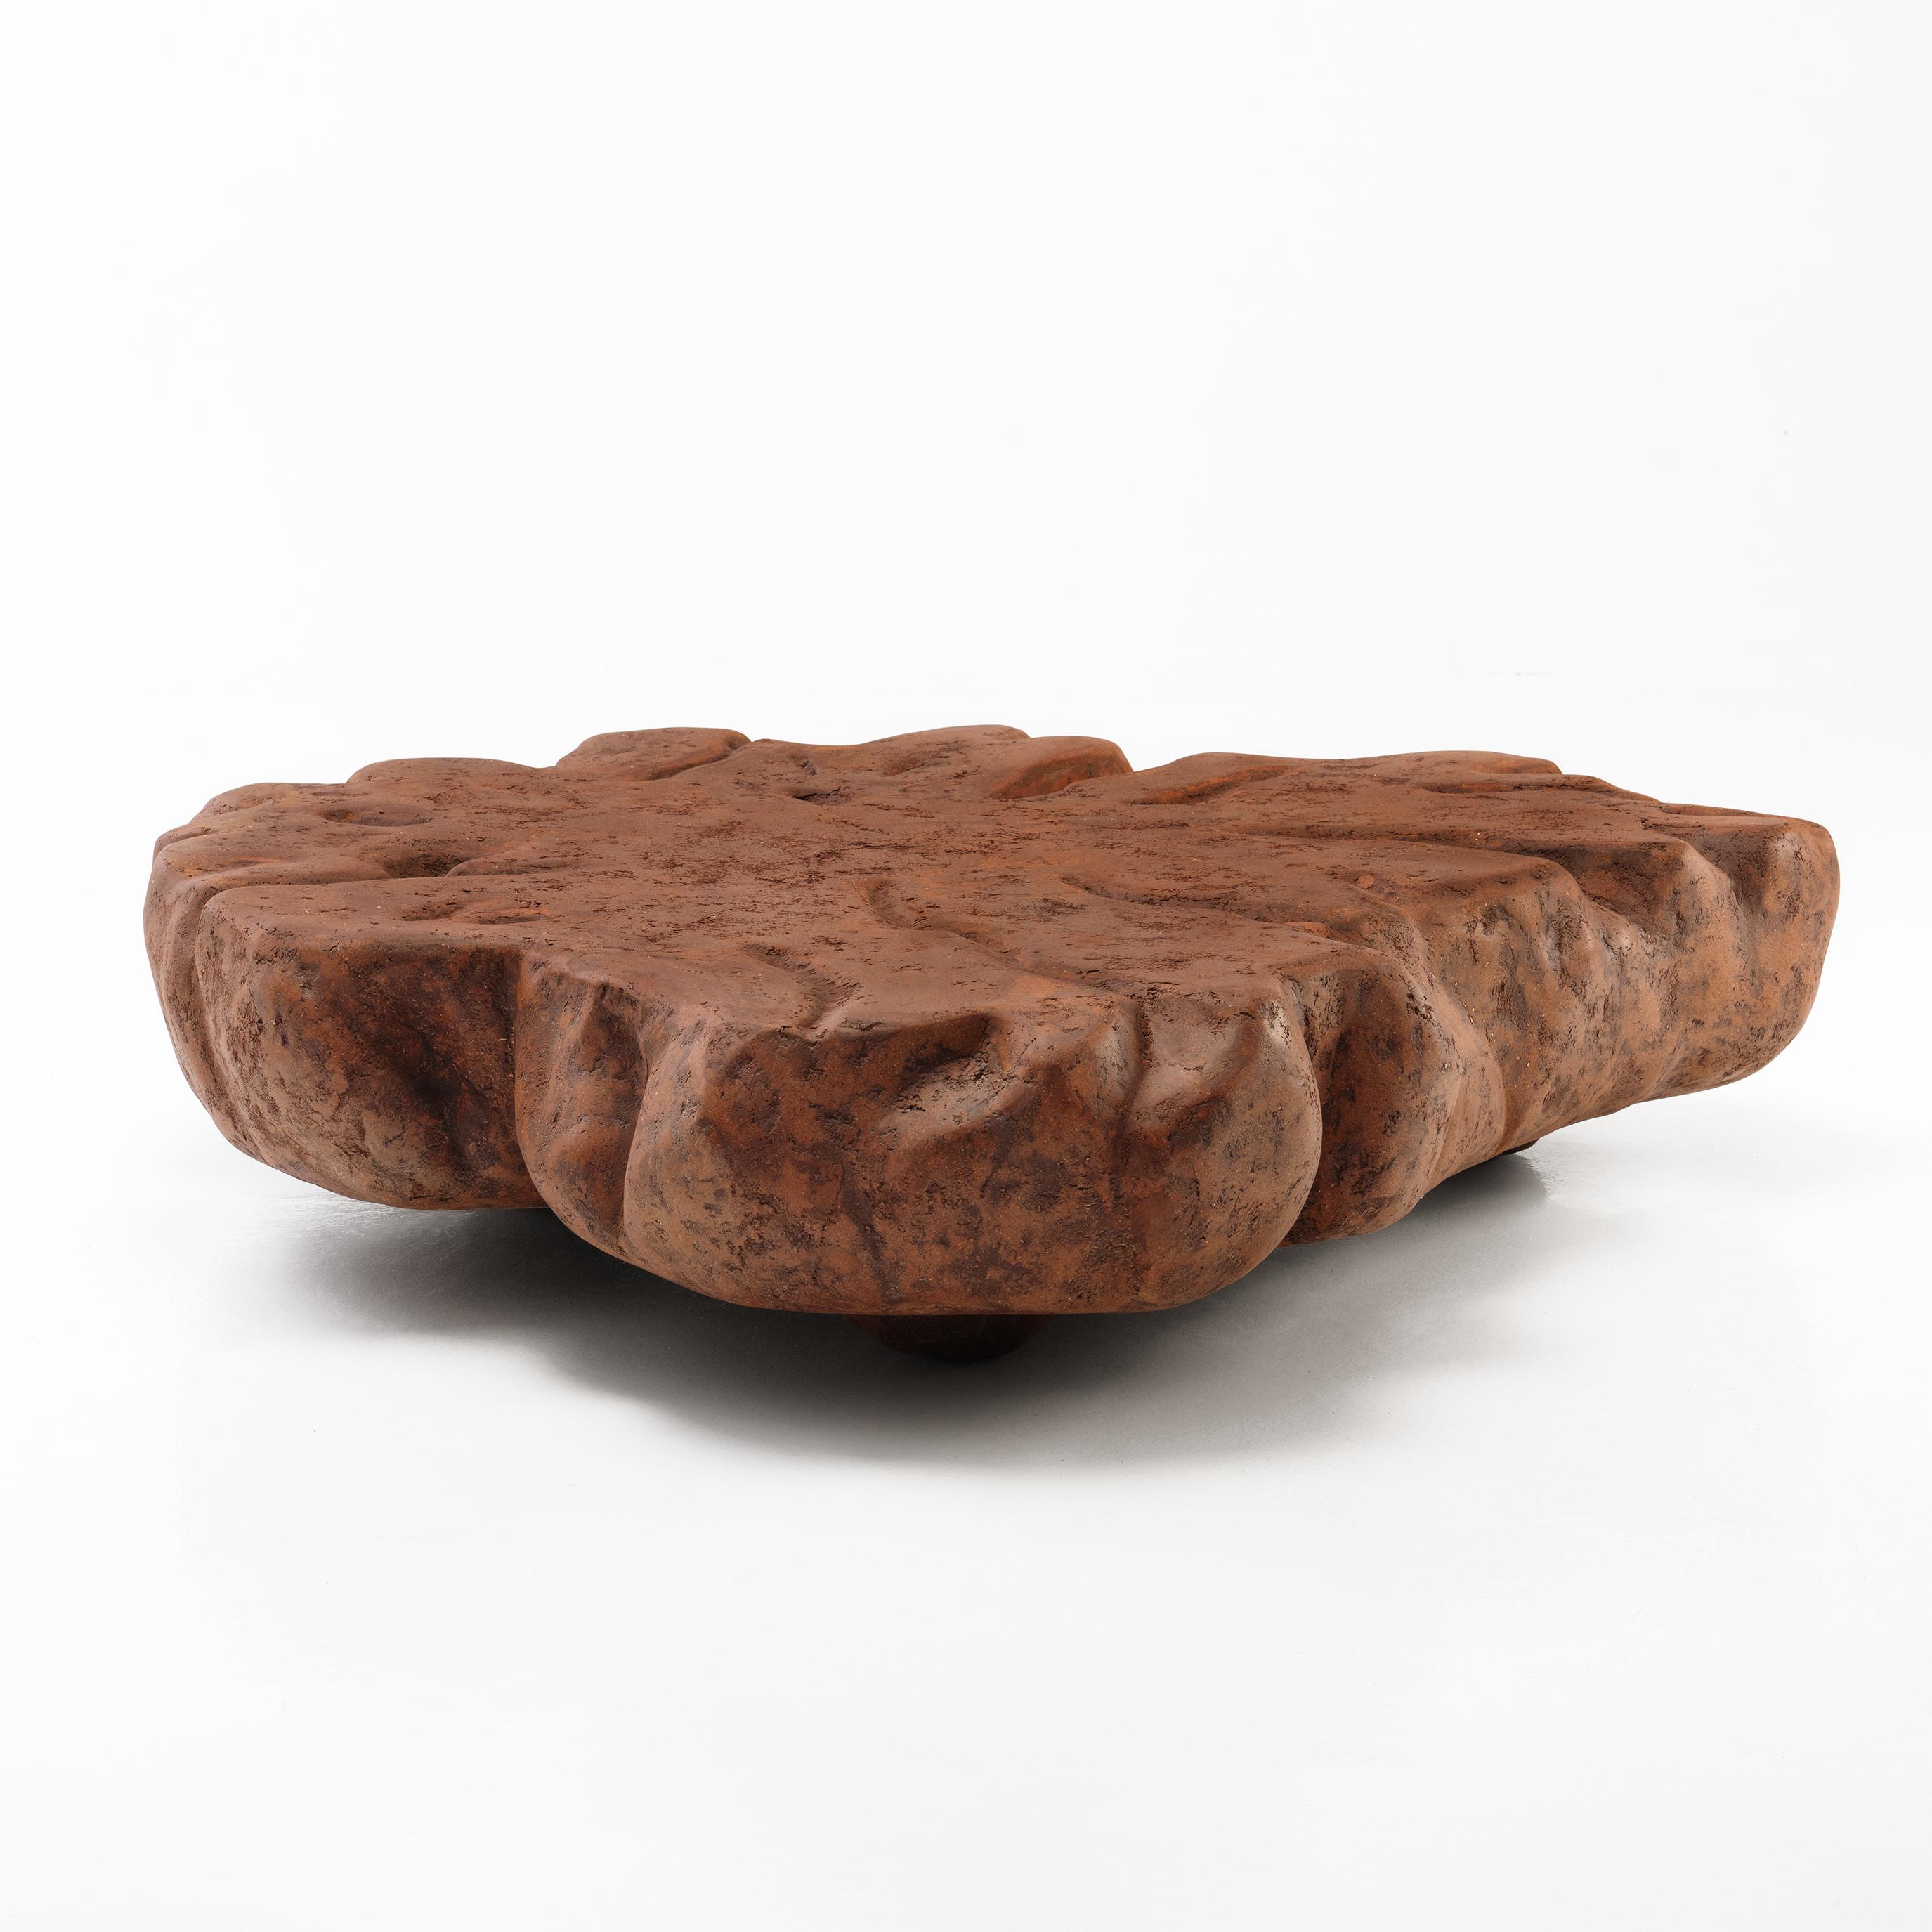 Organic Modern Down To Earth • Hand-Sculpted Red Earth Stone Coffee Table by Odditi For Sale